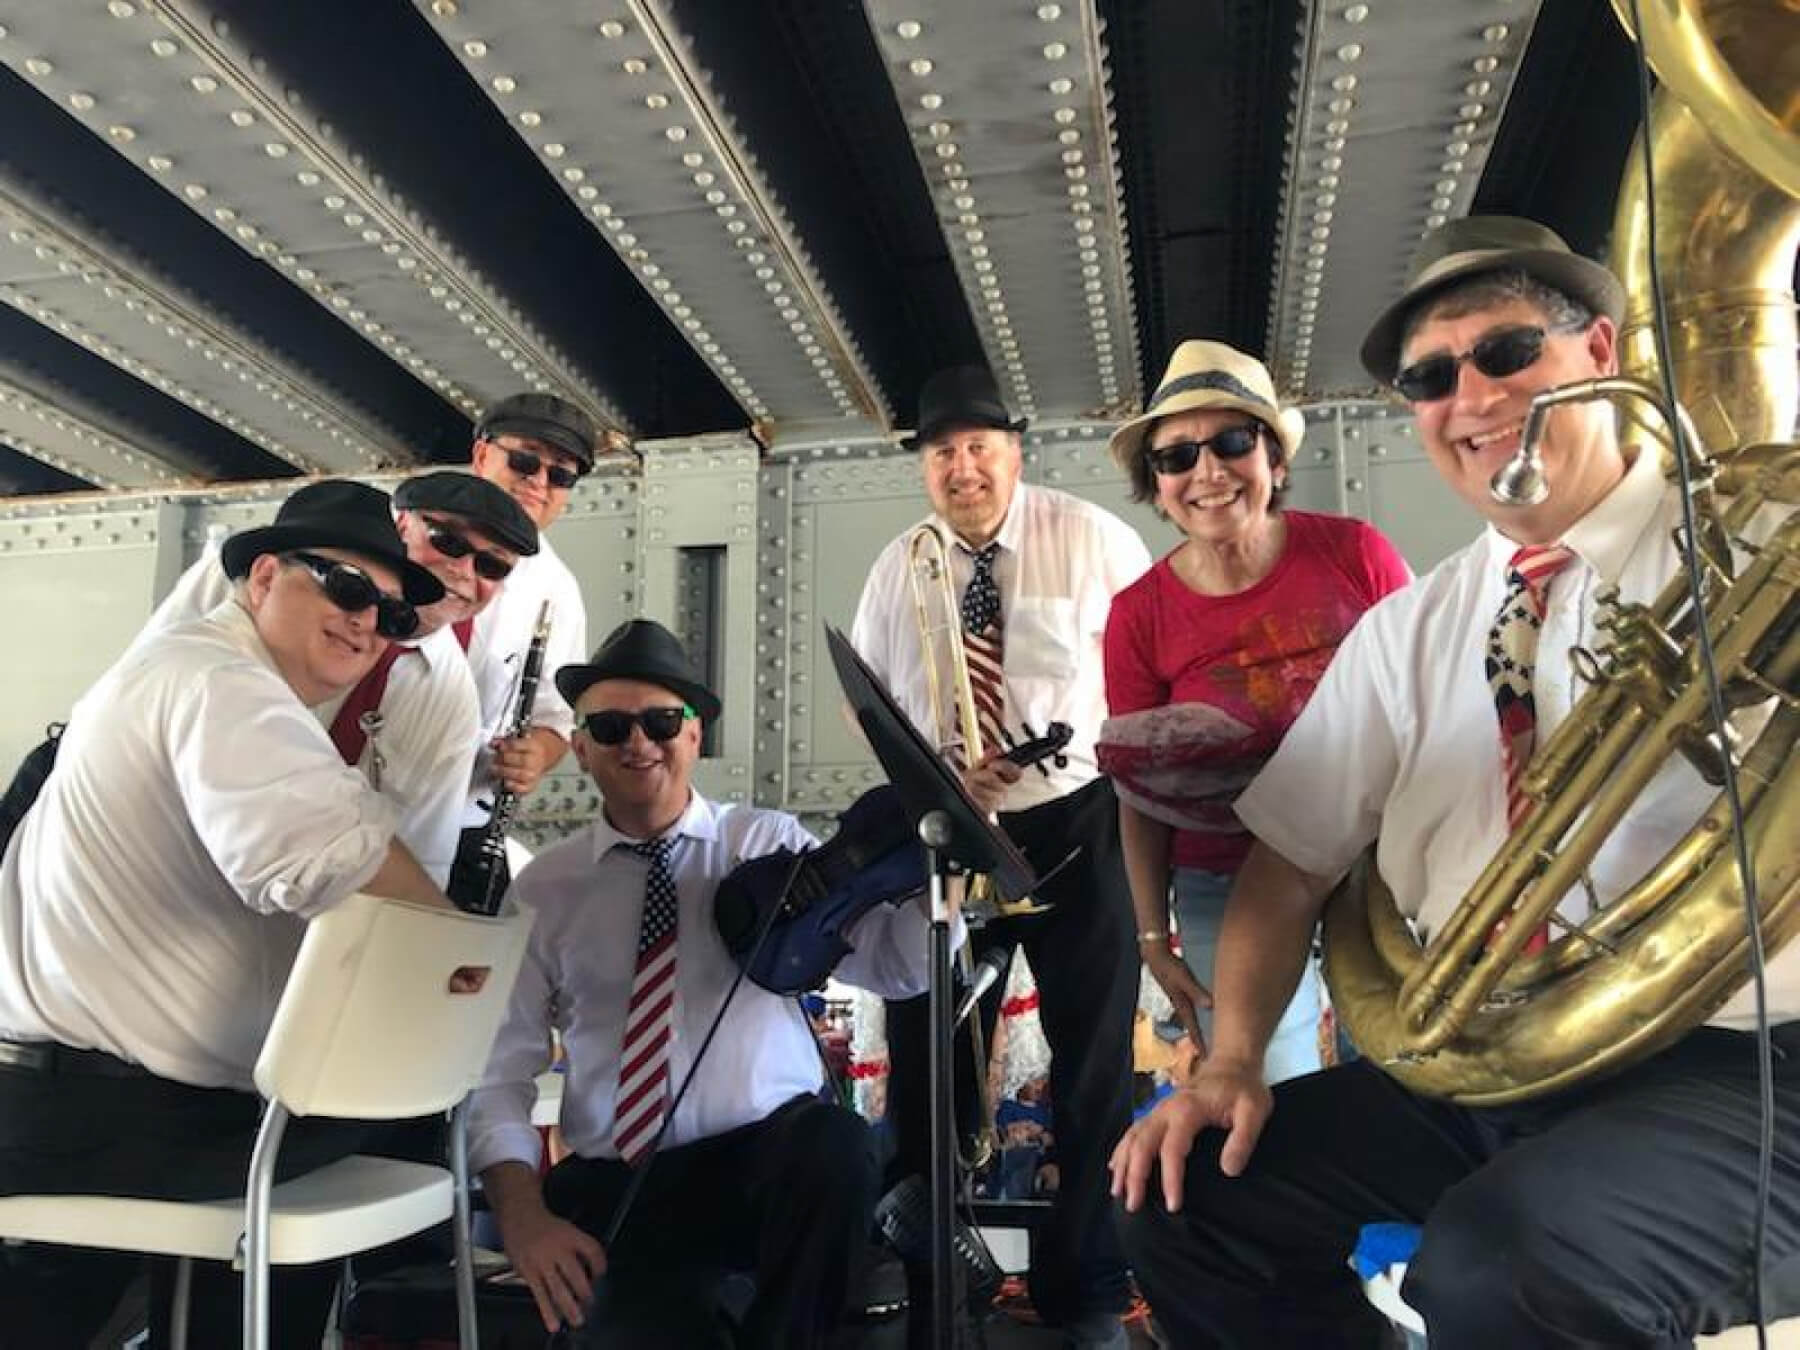 The Maxwell Street Klezmer band under a bridge at the Highland Park July 4 parade in 2019.